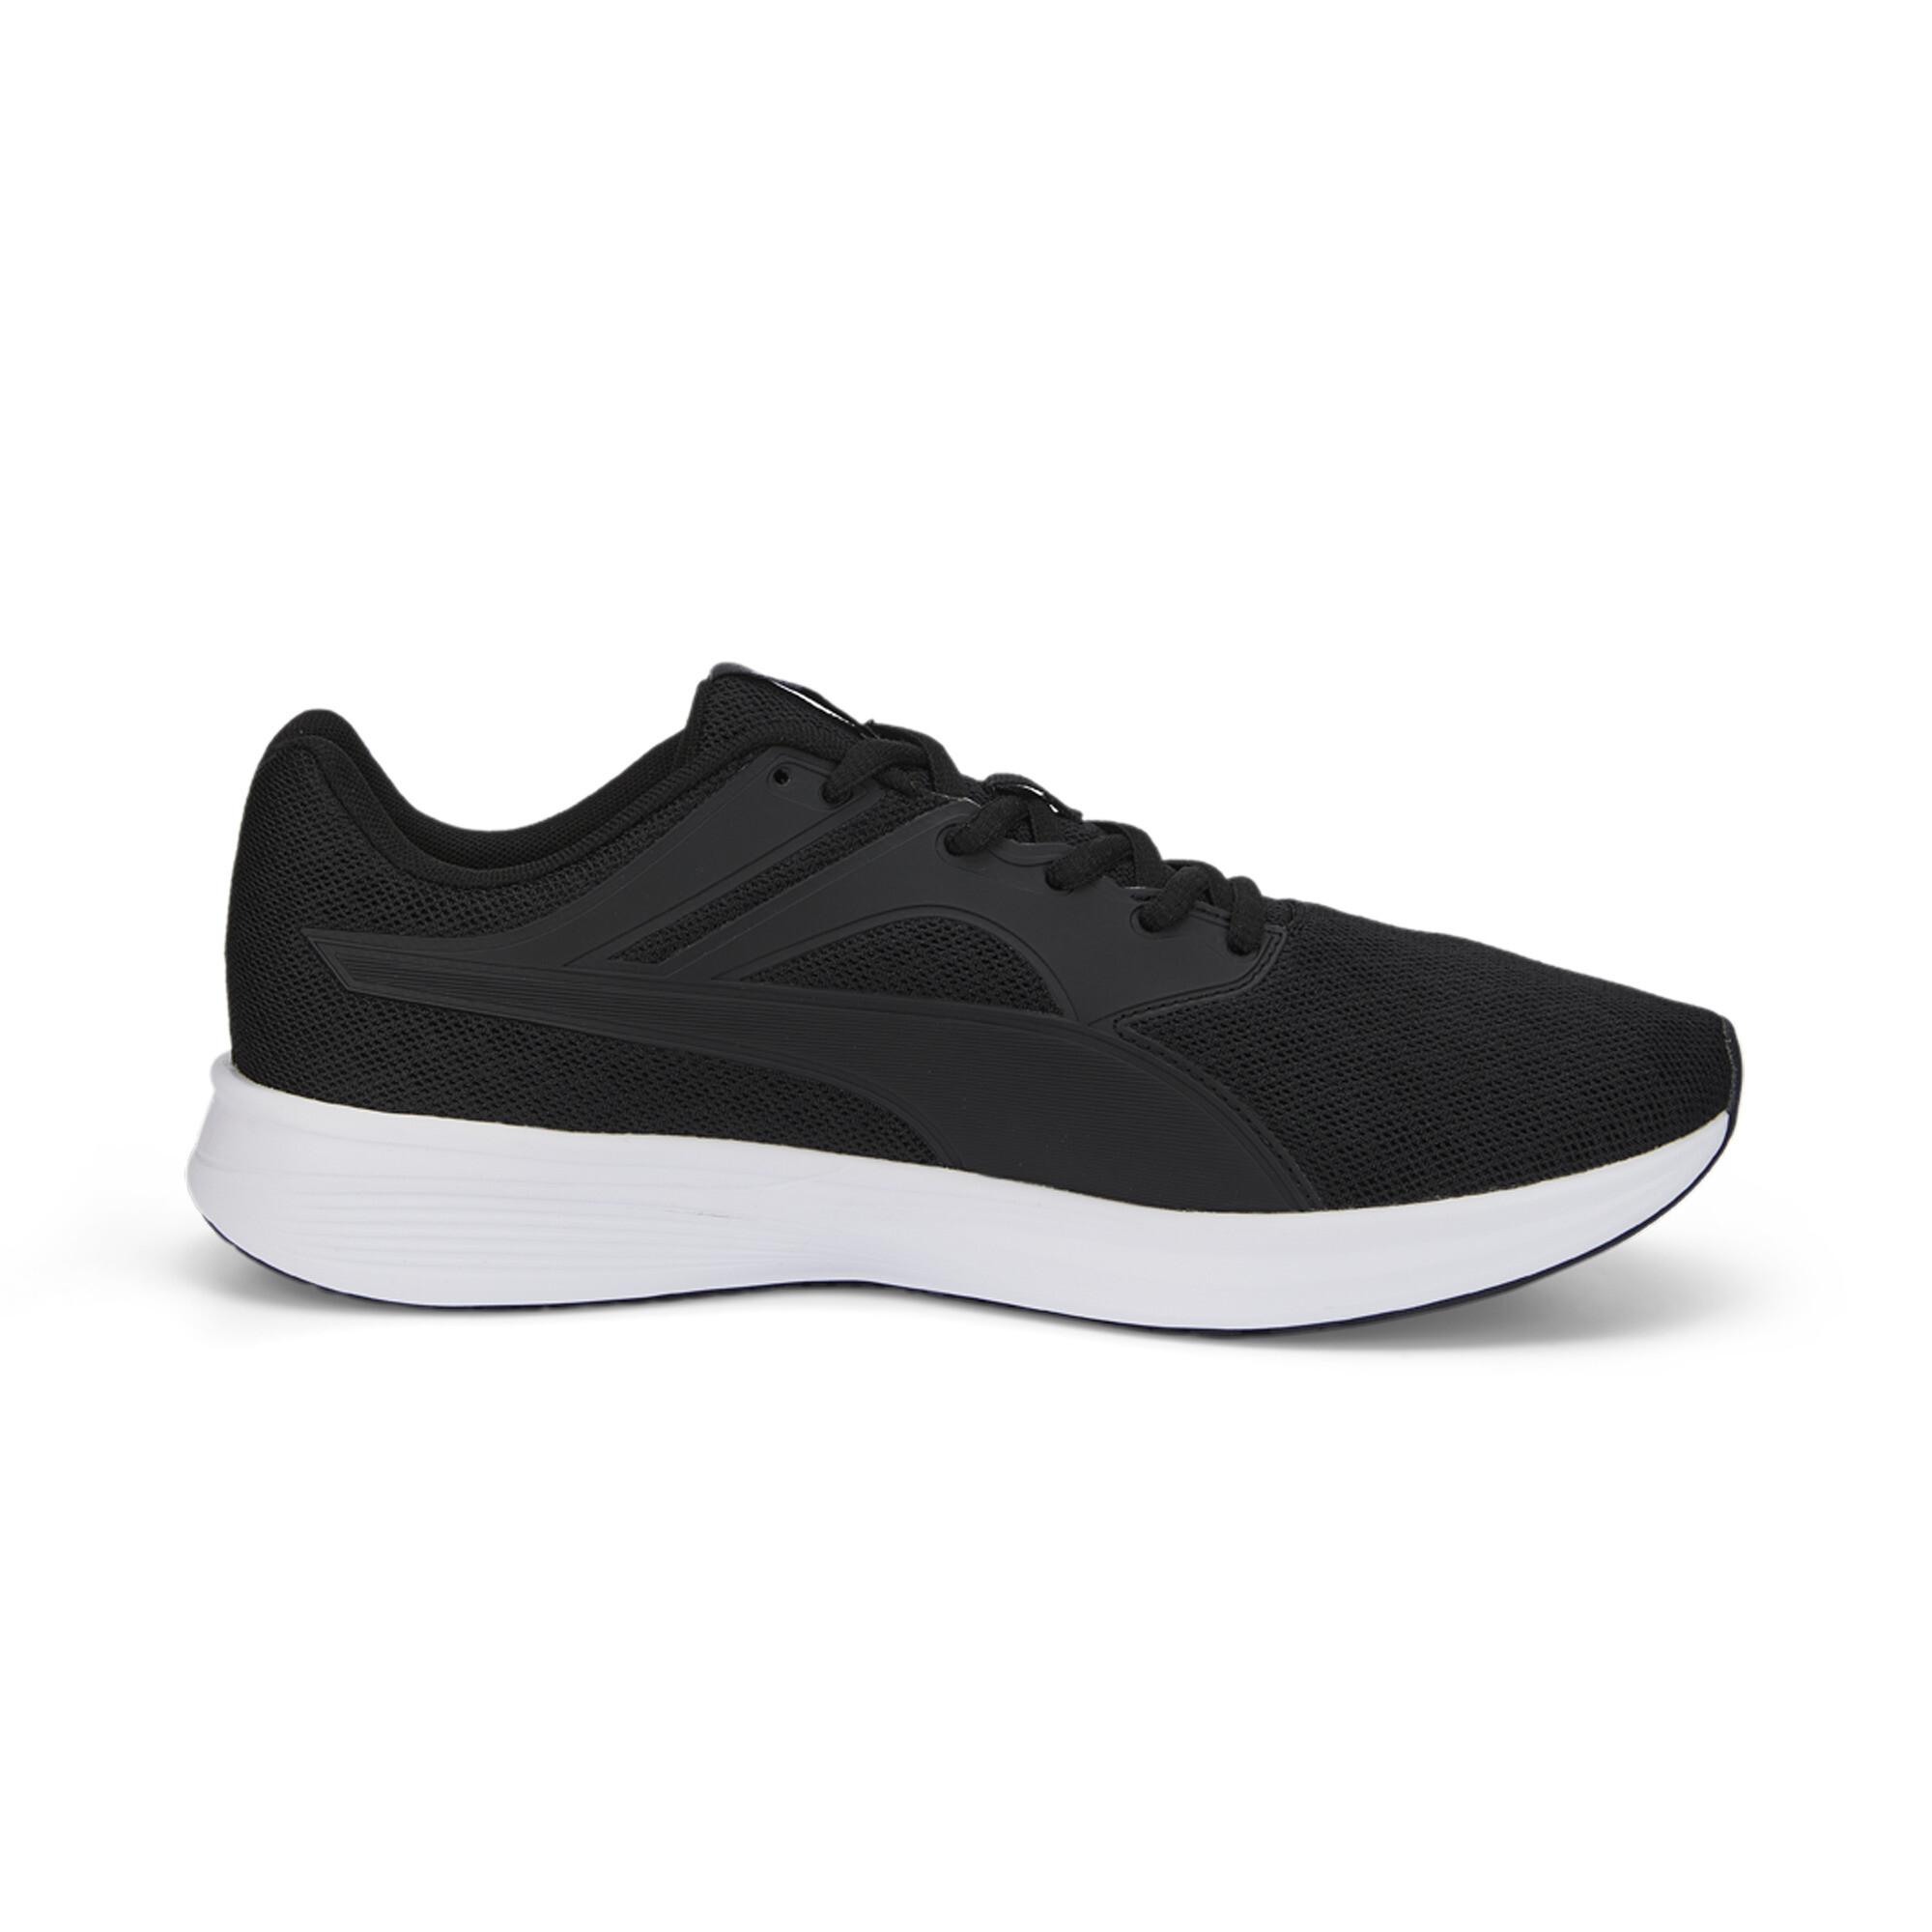 Puma Transport Running Shoes, Black, Size 40.5, Shoes